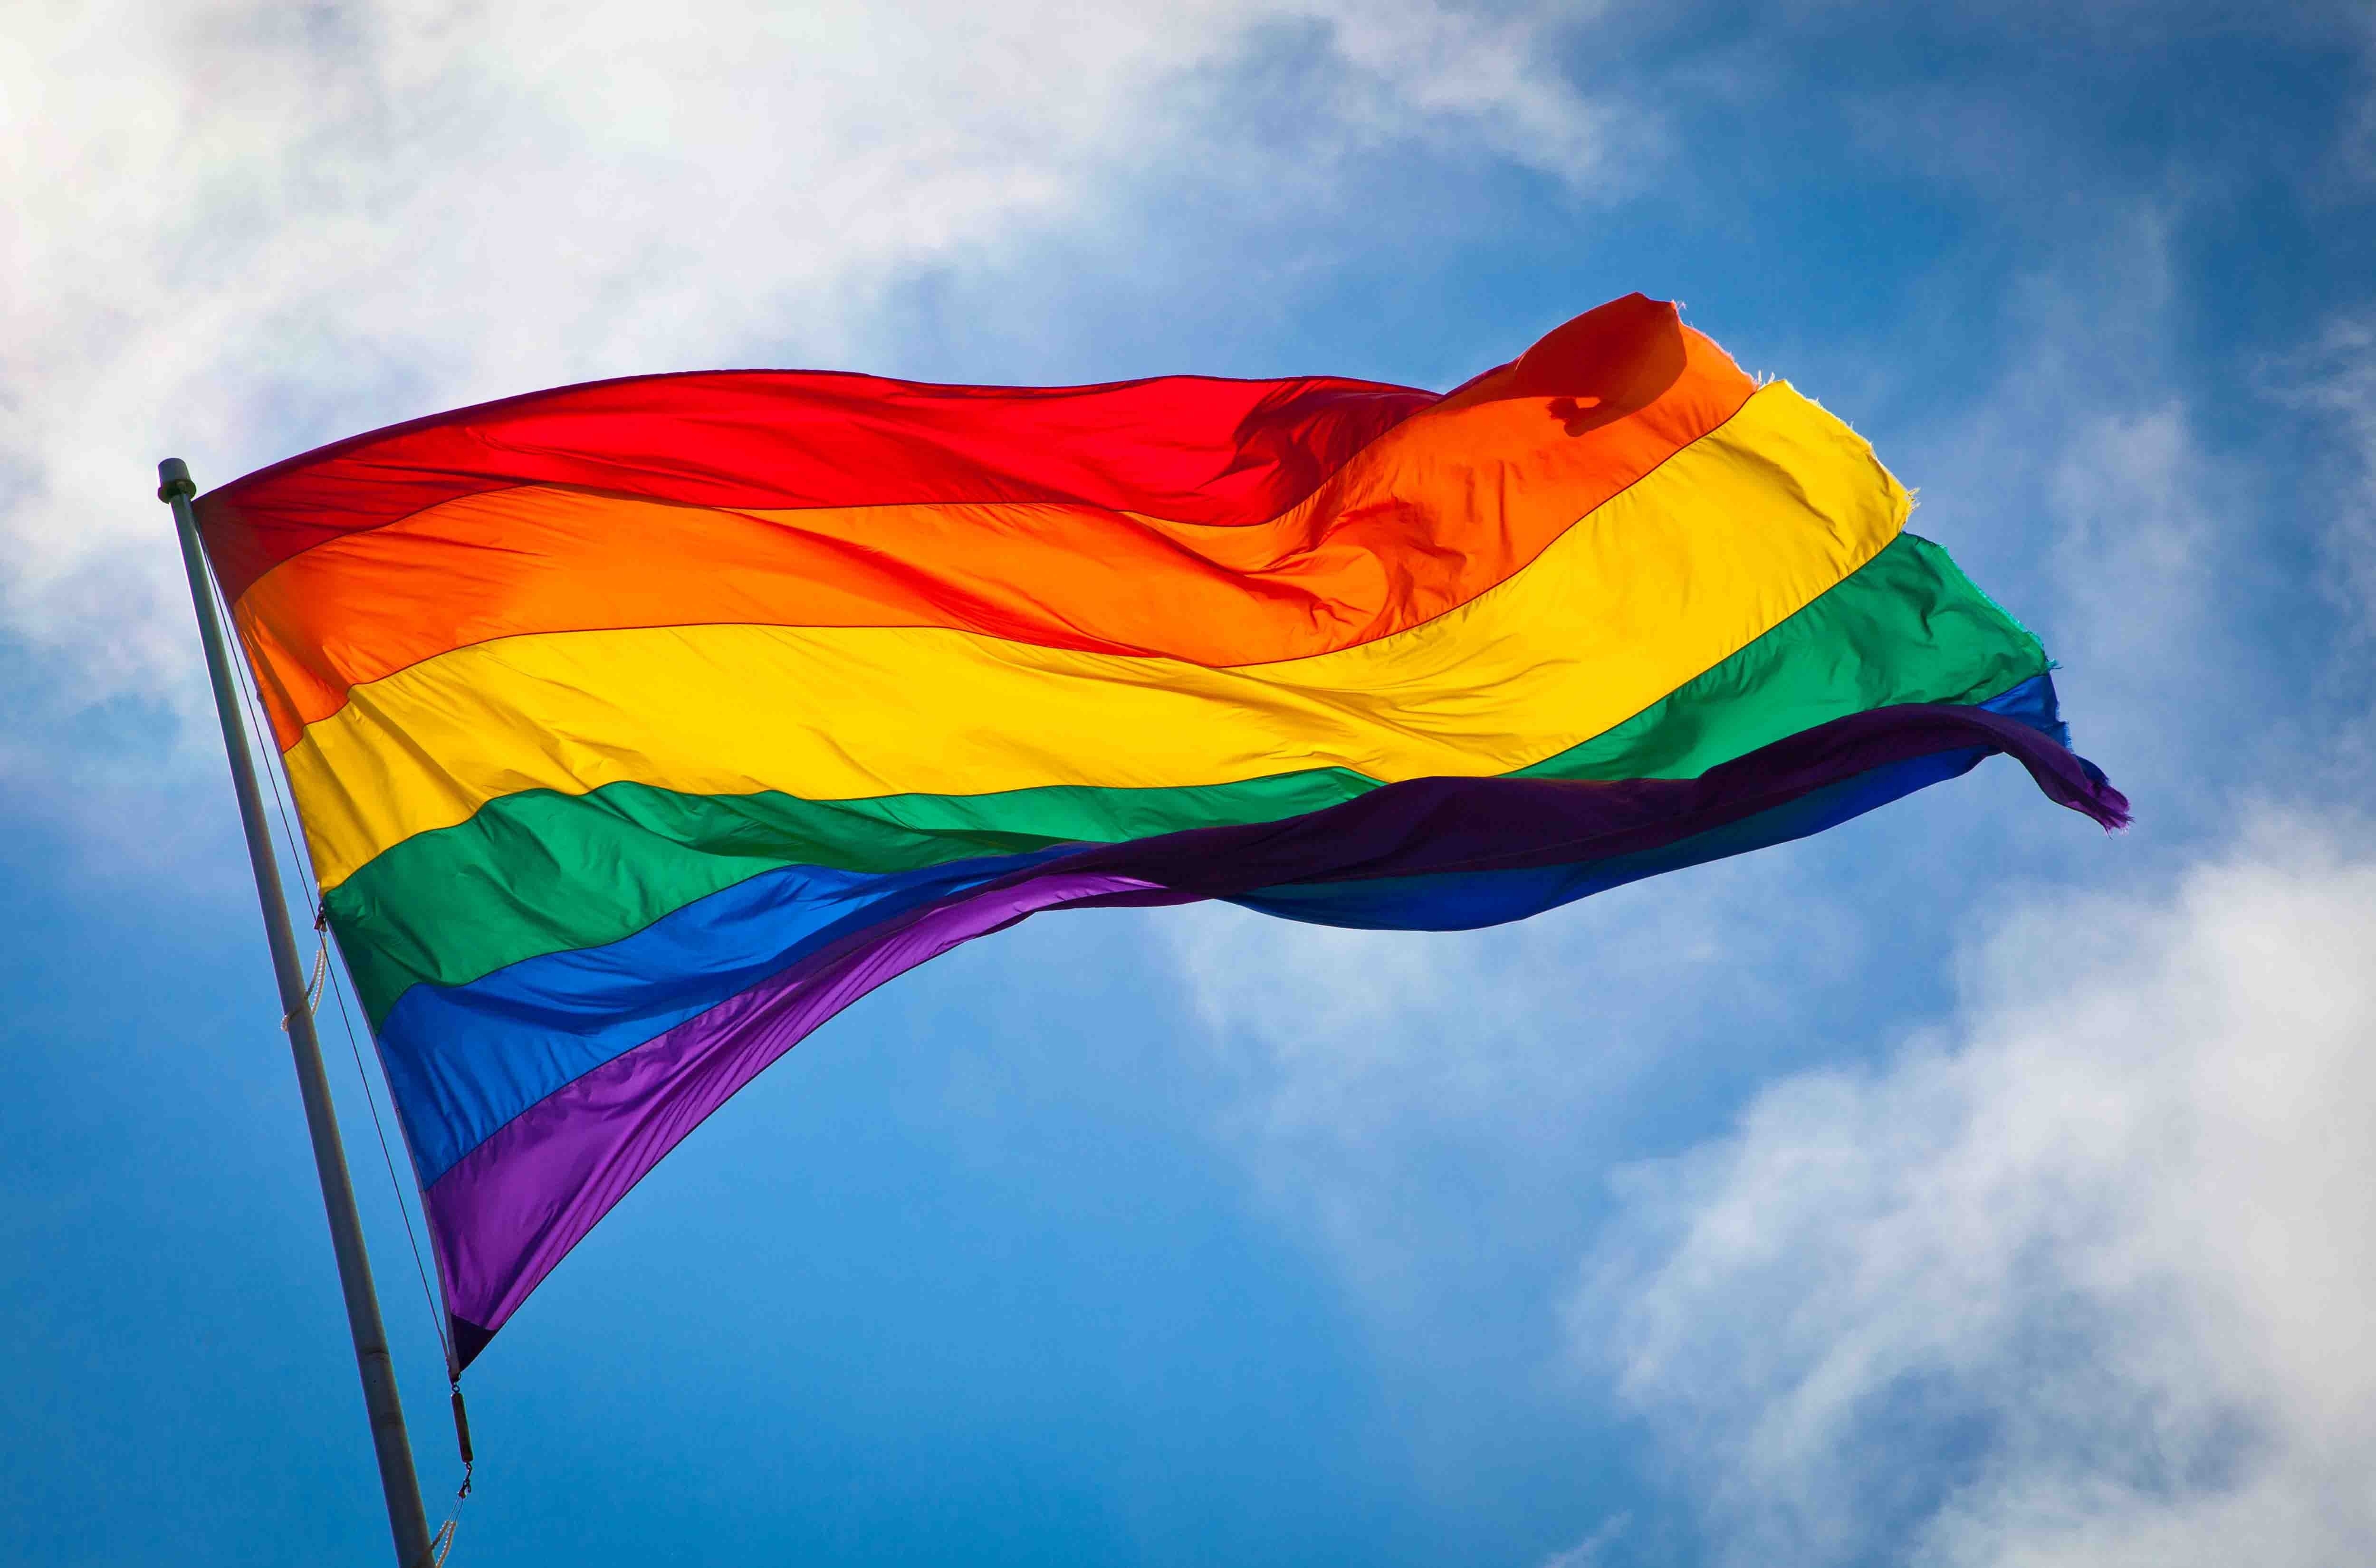 rainbow flag supports the LGBT community